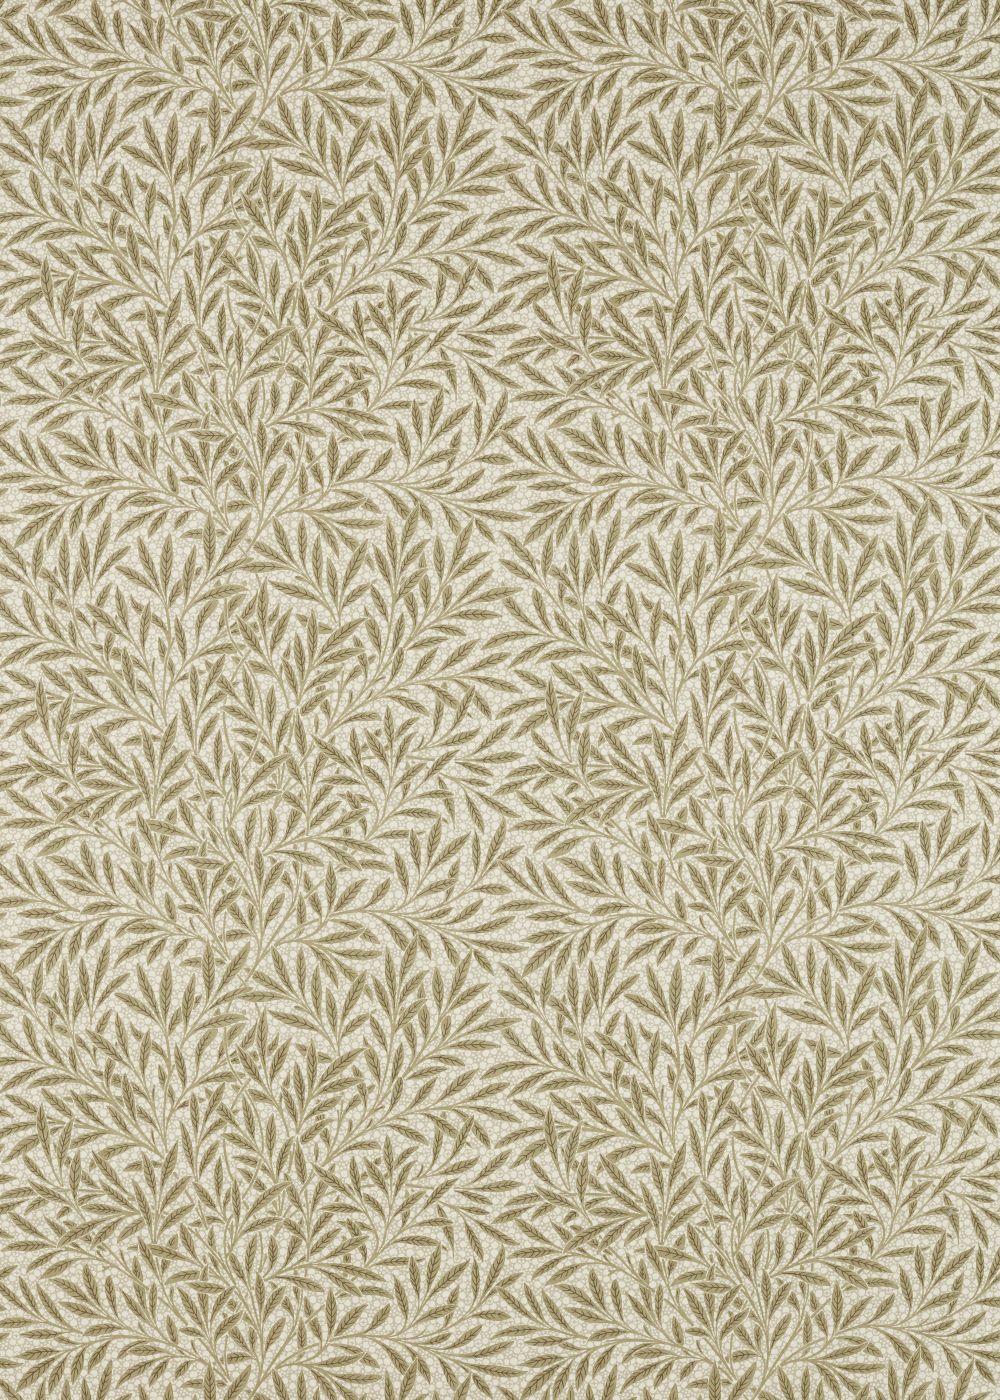 Emerys Willow Fabric - Citrus Stone - by Morris